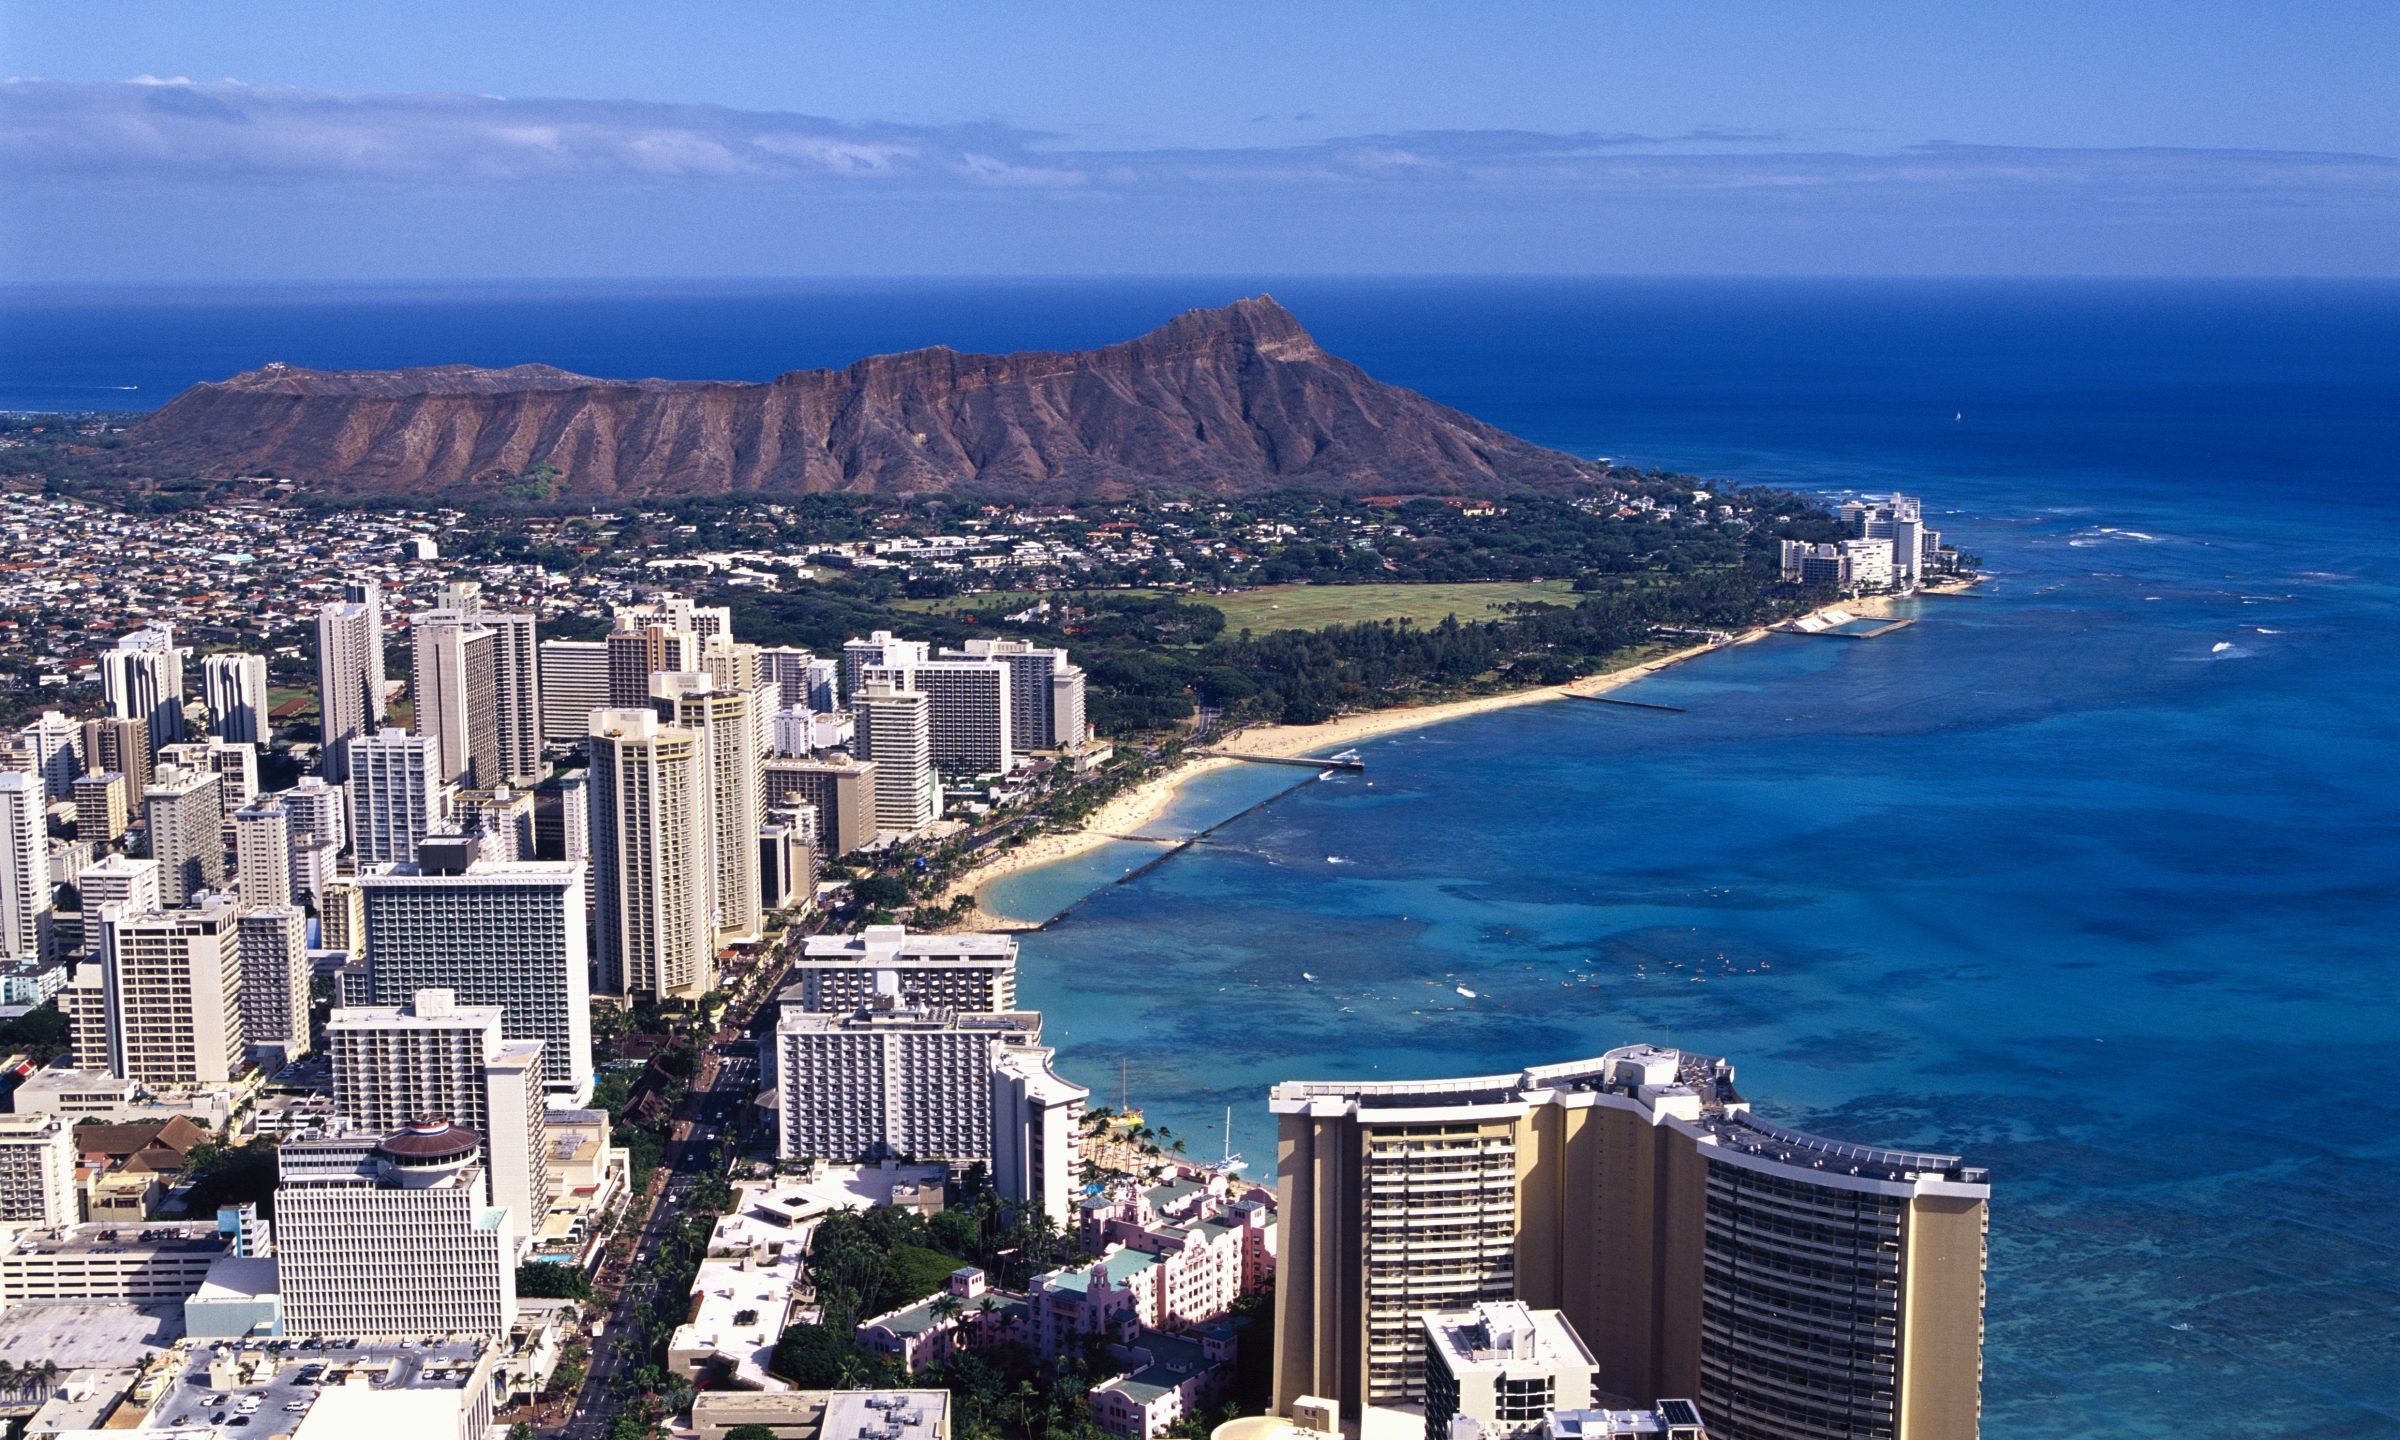 What Airlines Fly to Hawaii? 6 Top Options - NerdWallet